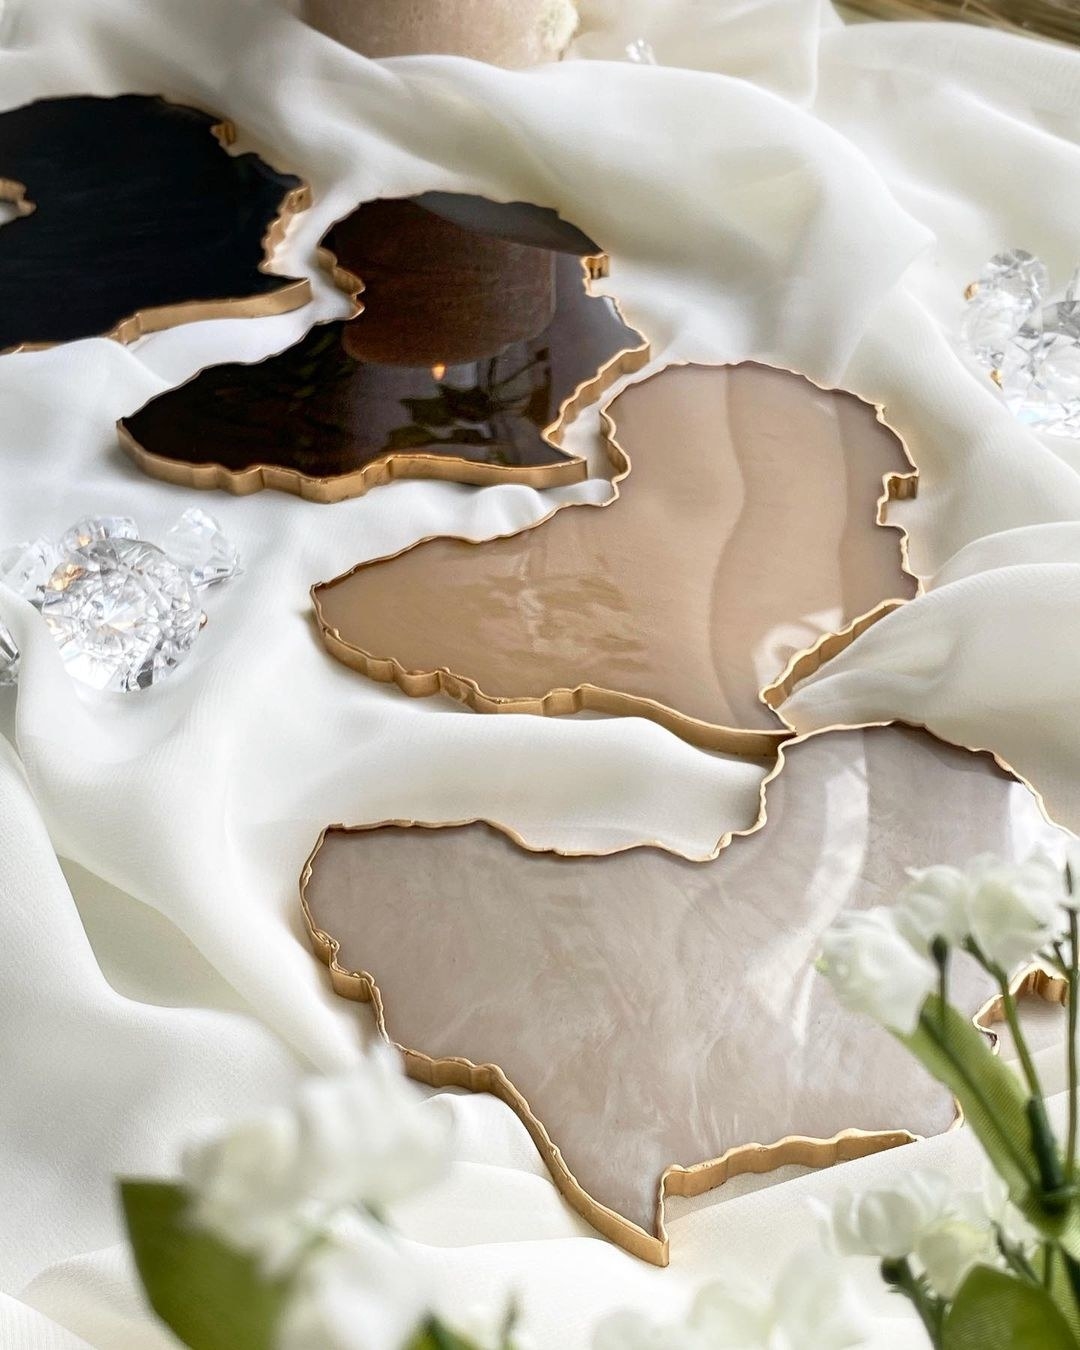 the Africa-shaped coasters in shades of brown and black with gold trim